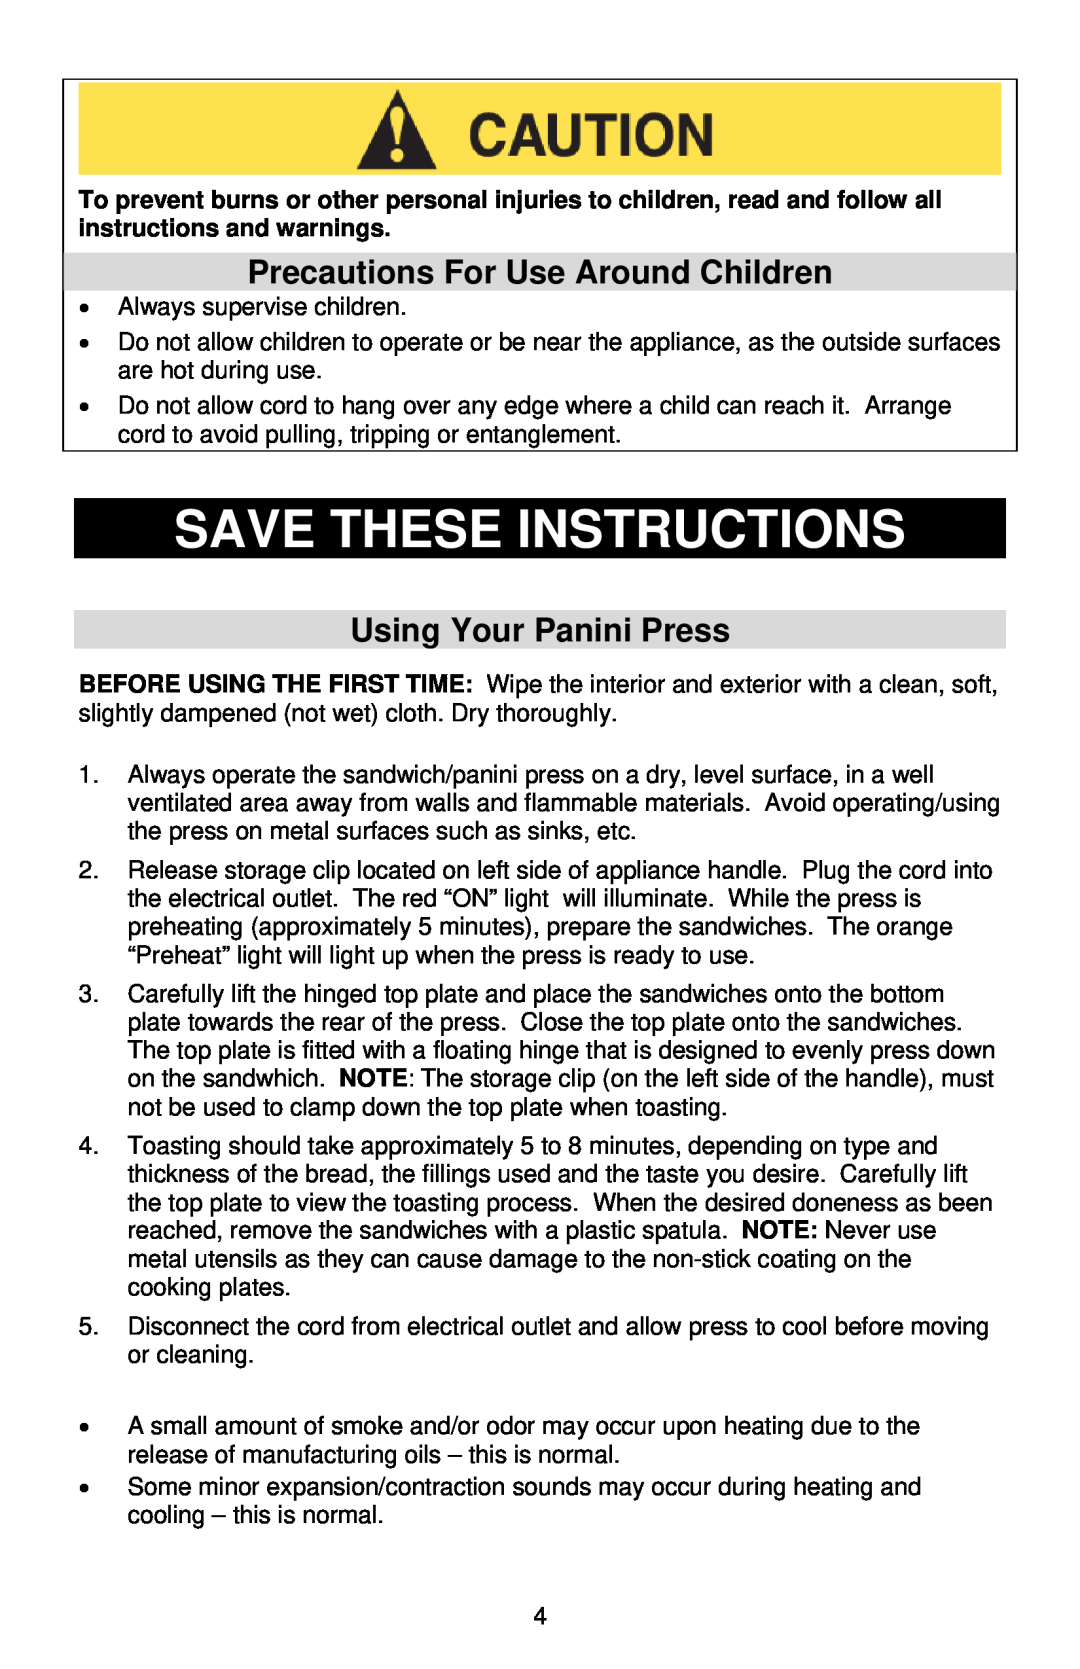 West Bend Sandwich Maker Save These Instructions, Precautions For Use Around Children, Using Your Panini Press 